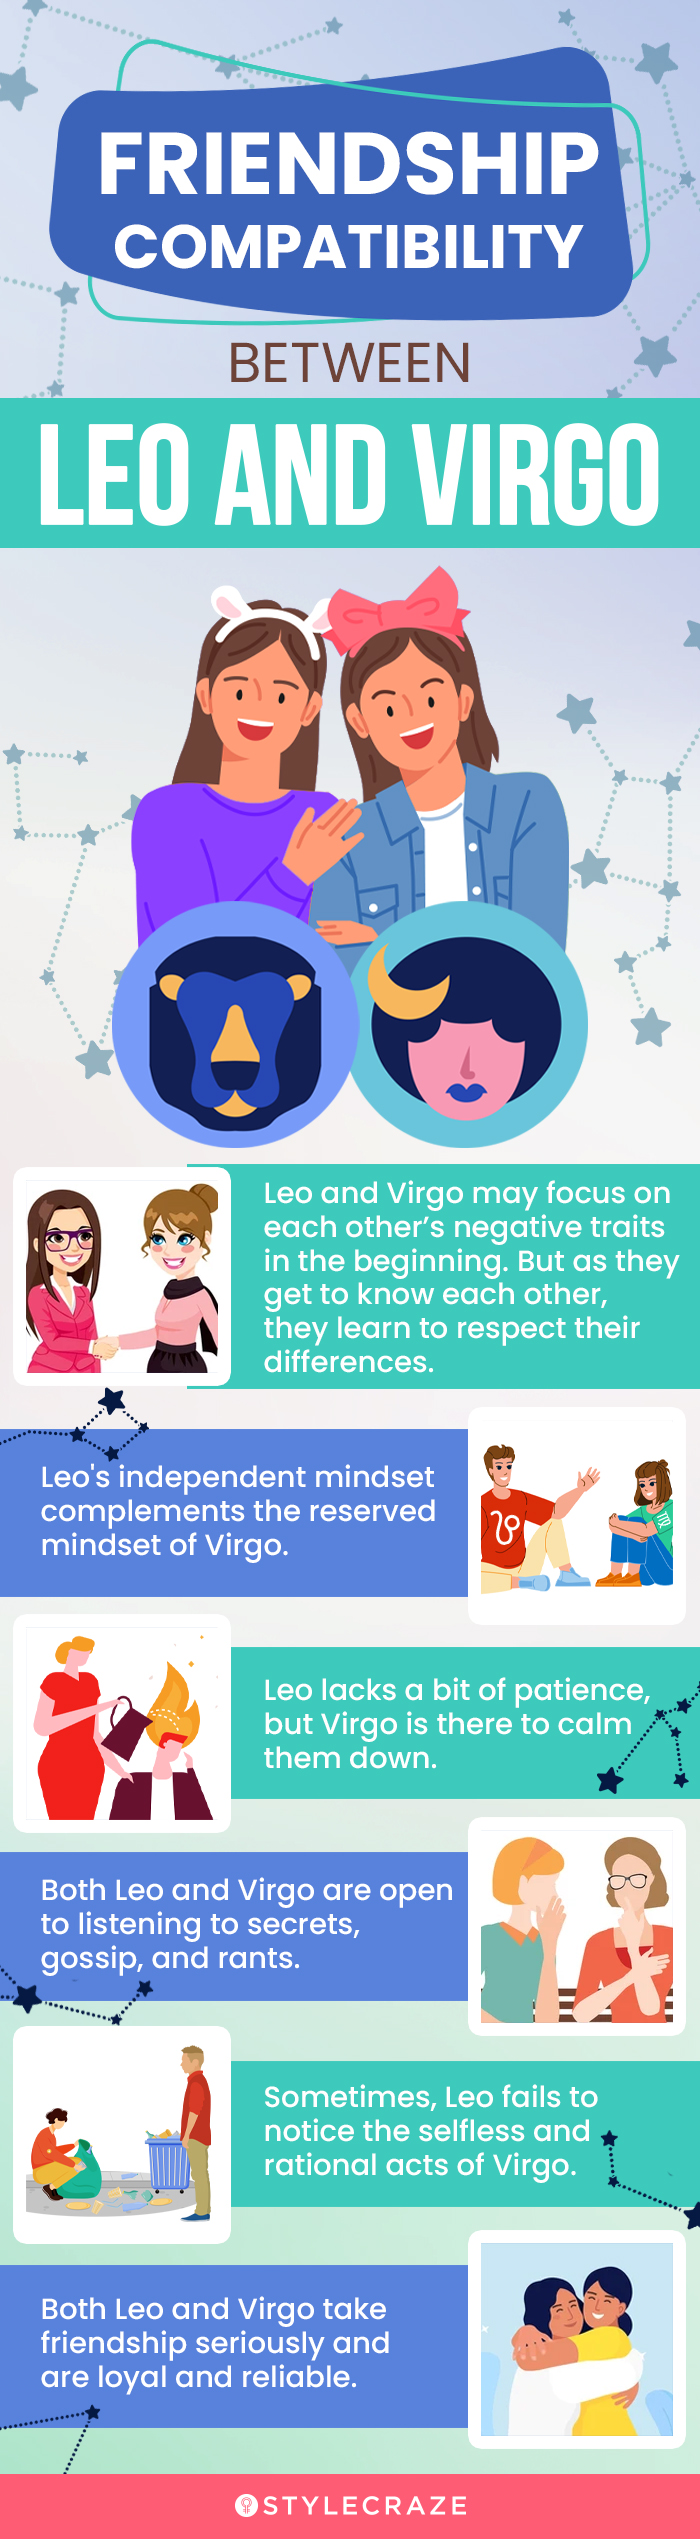 friendship compatibility points between leo and virgo signs [infographic]